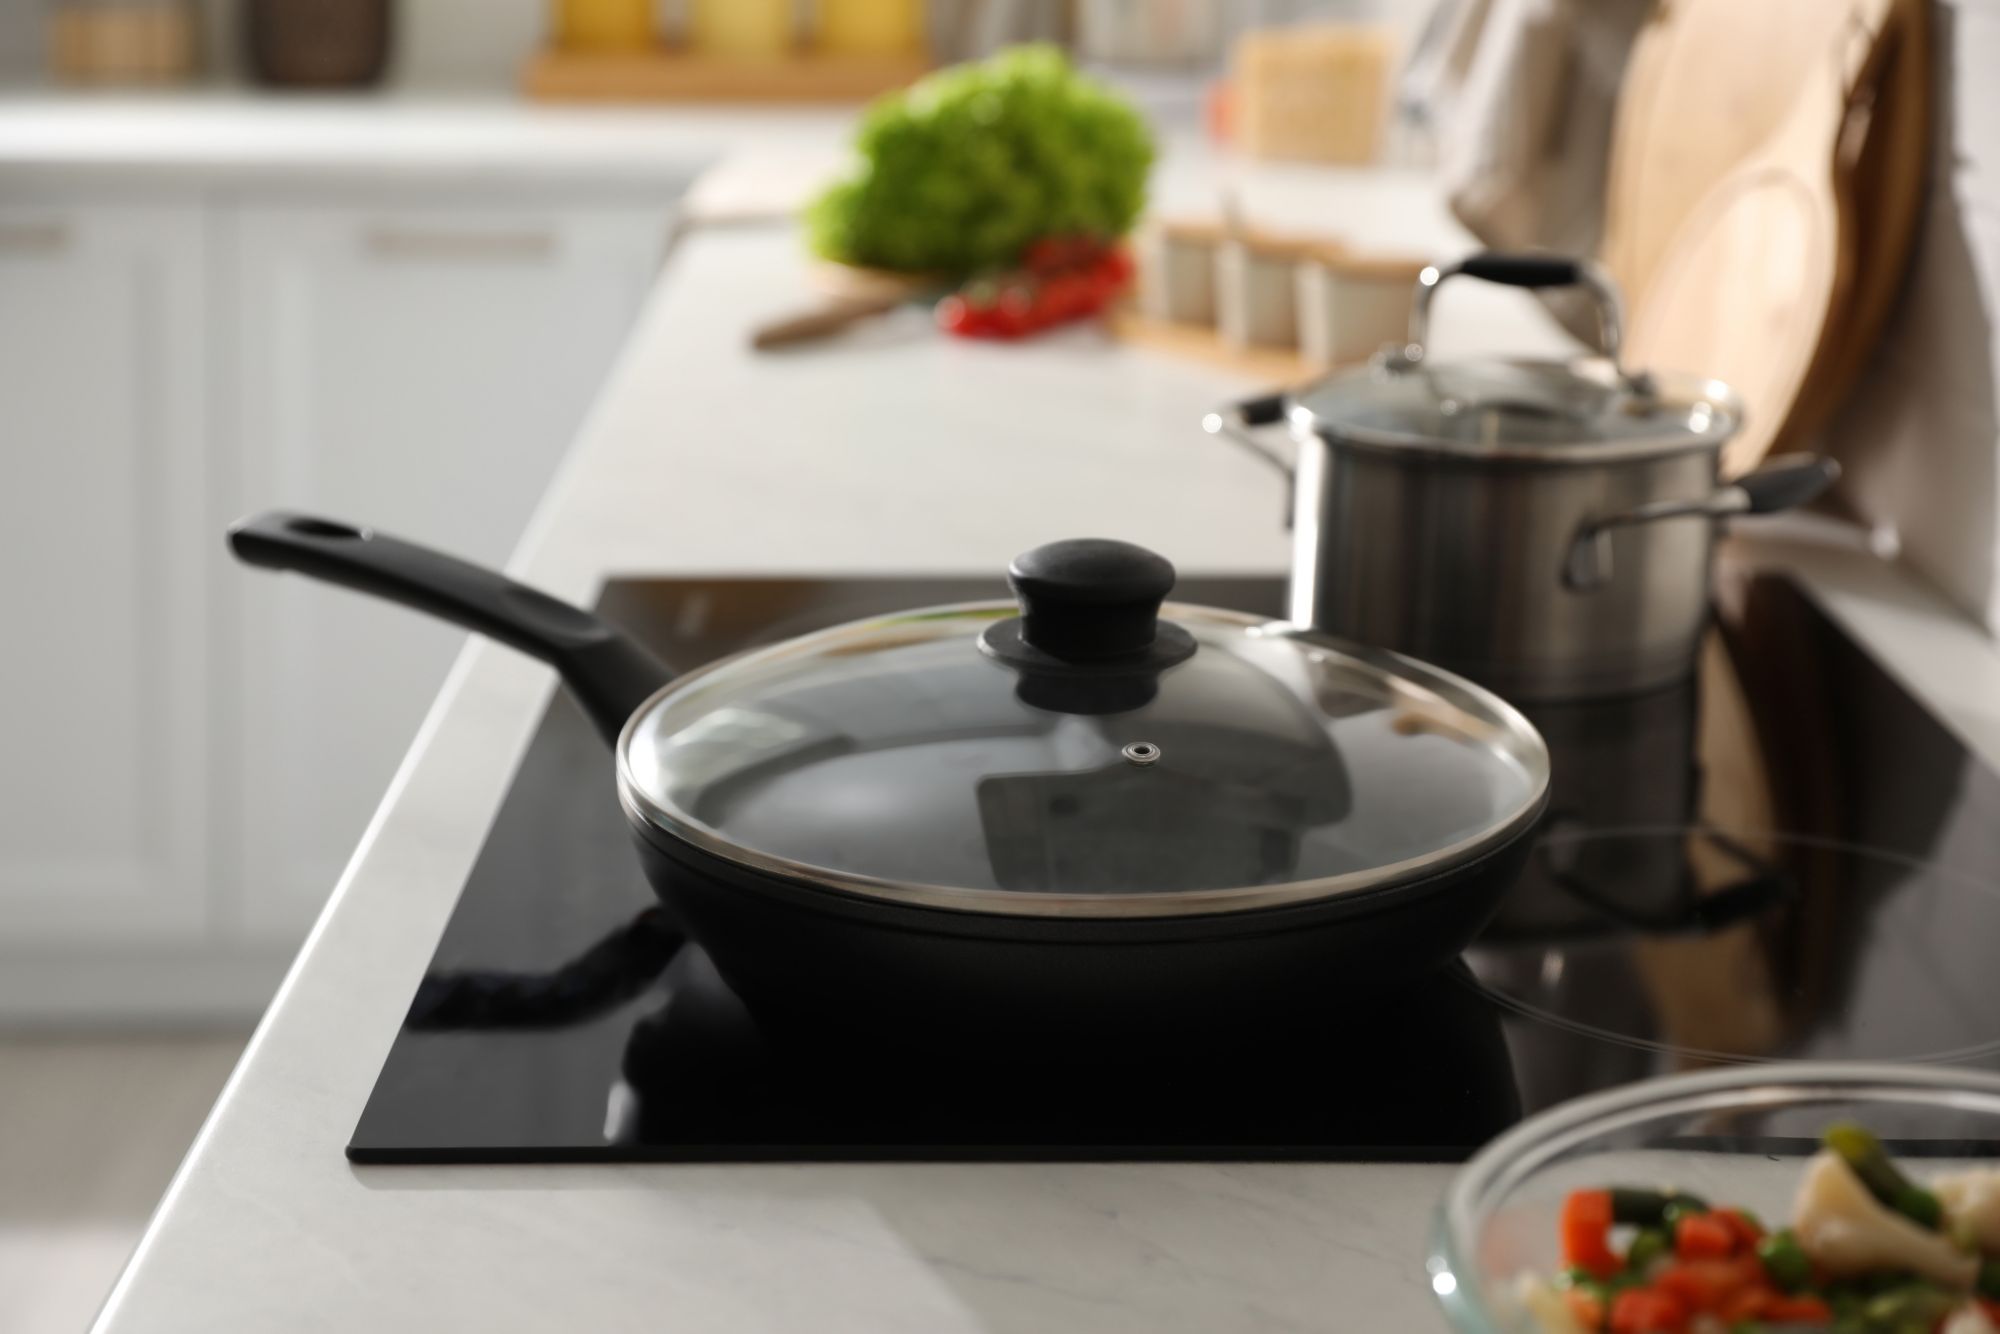 Frying pan with lid on cooktop in kitchen